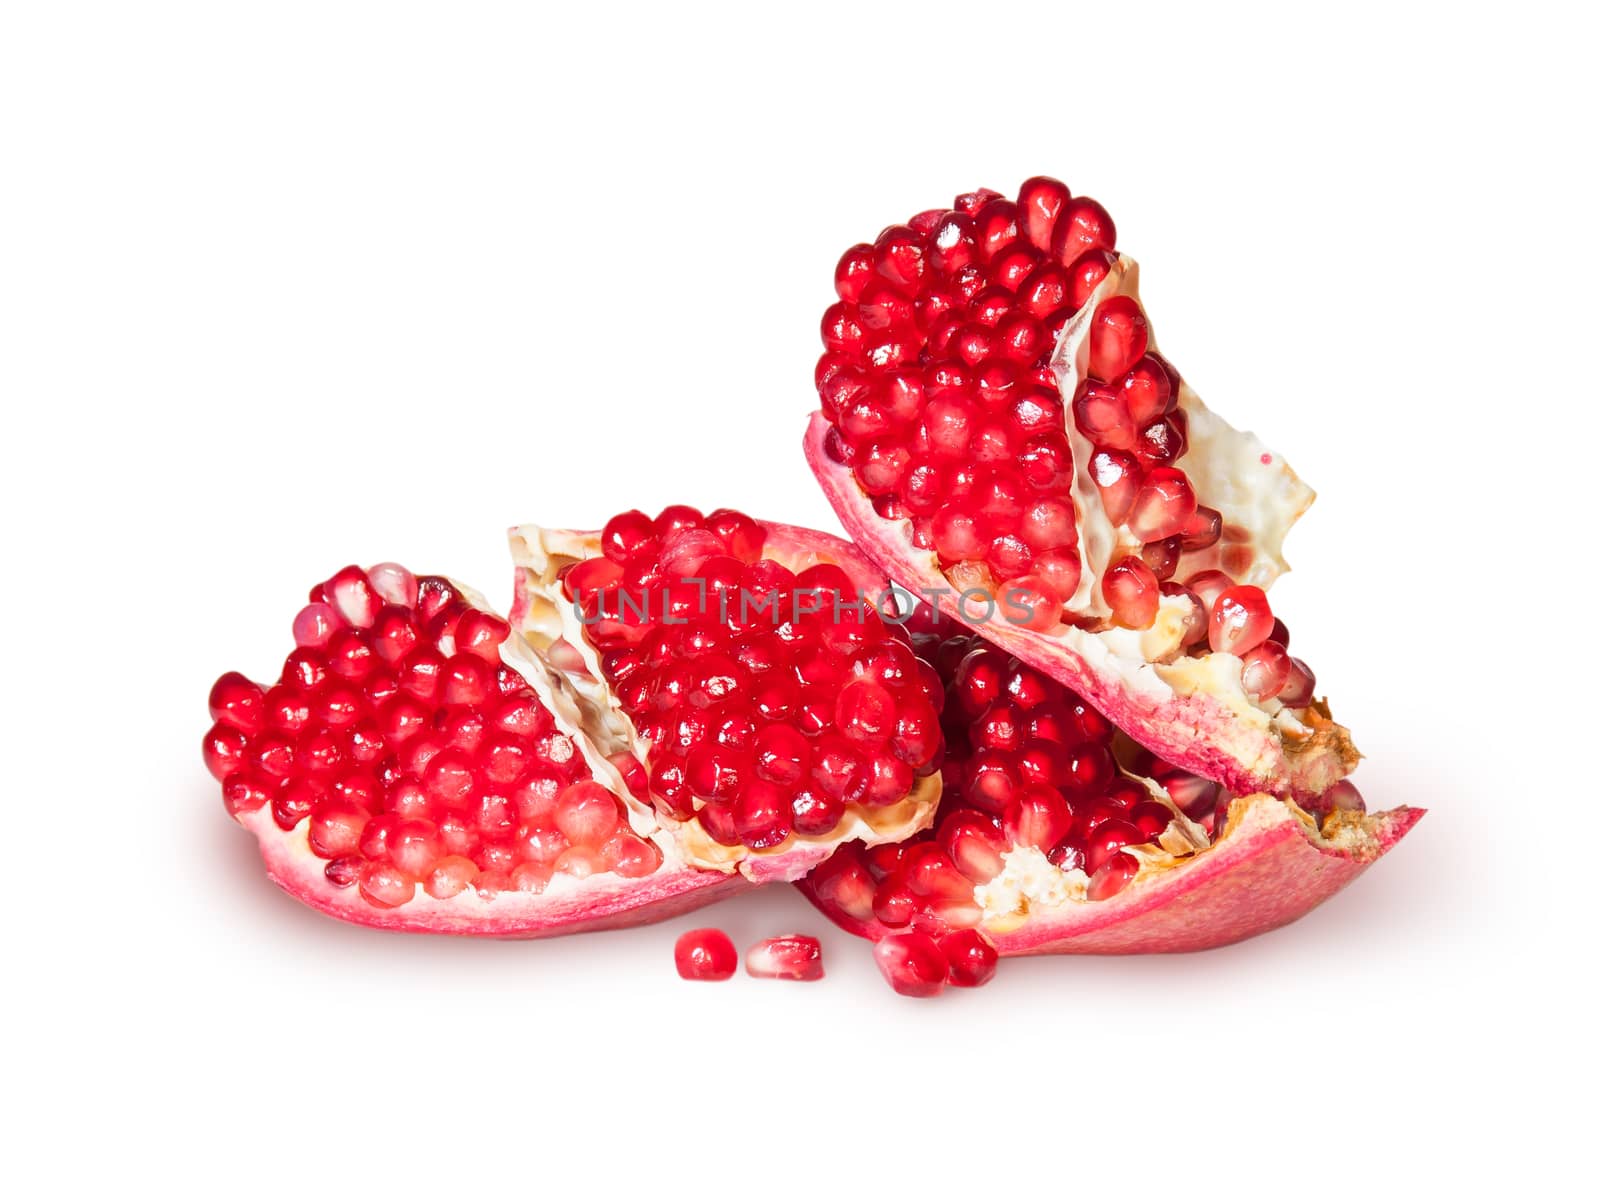 Several Of Ripe Juicy Pomegranate Isolated On White Background